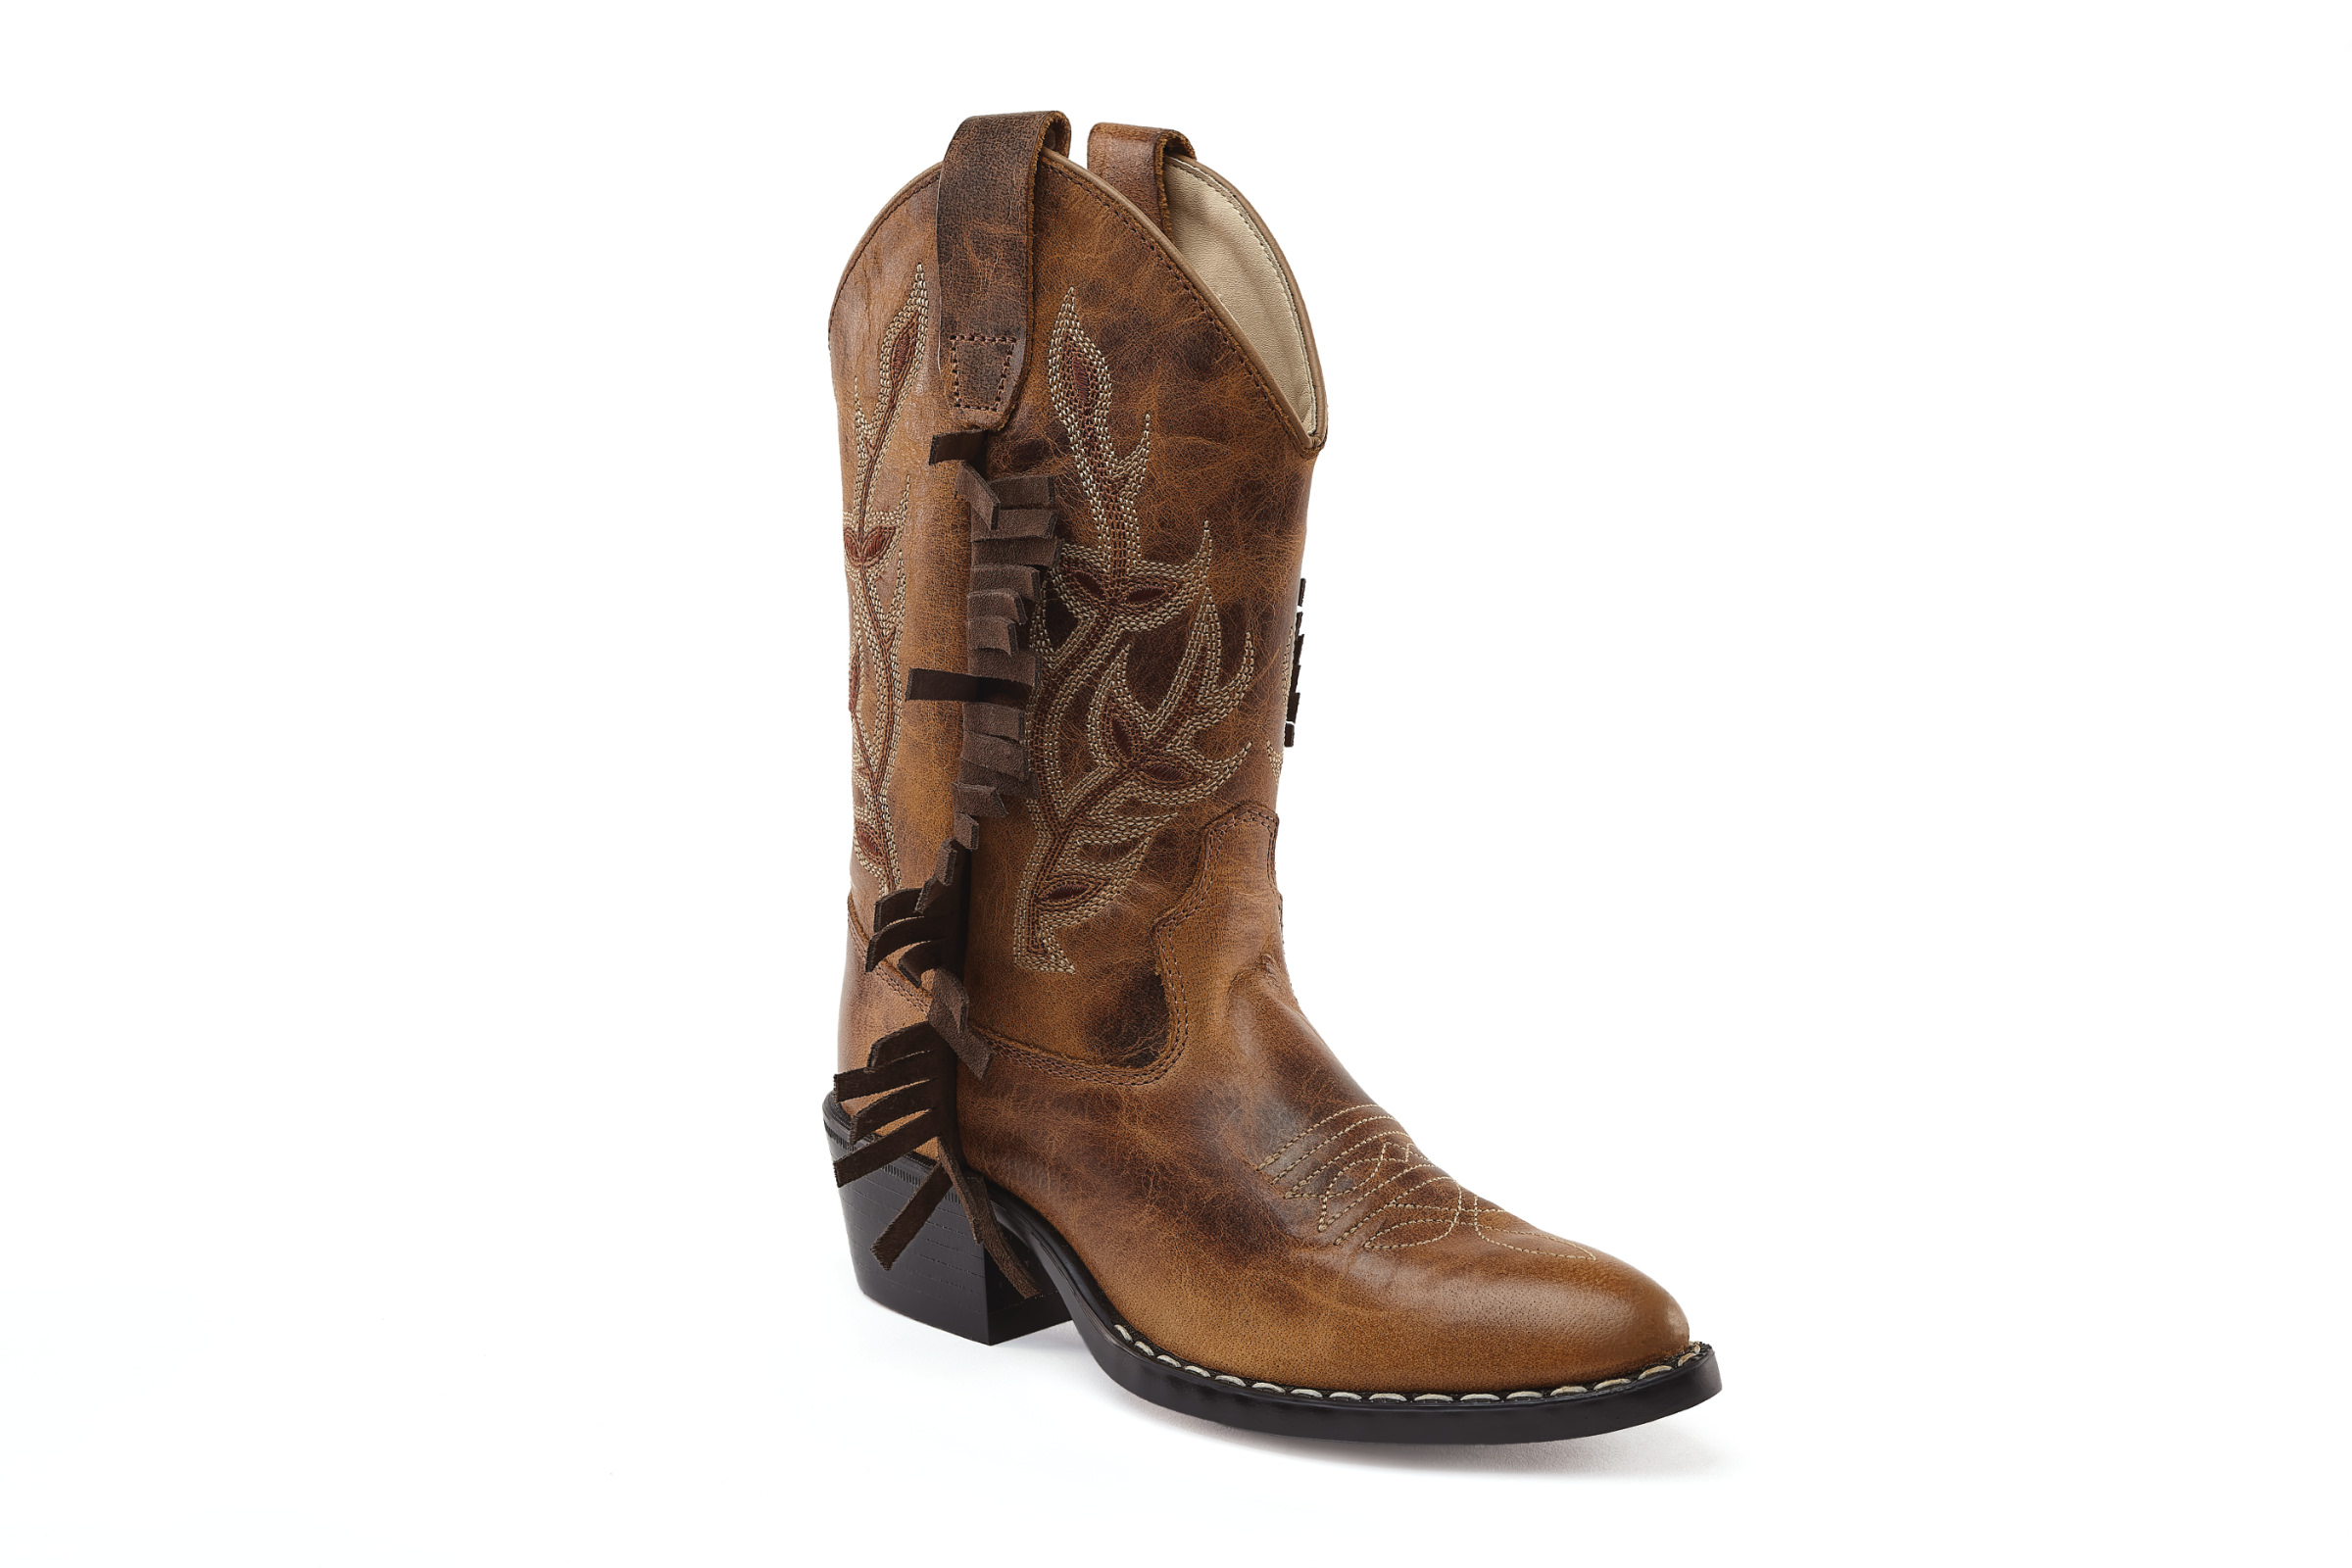 Cowboy boots for children 8199 Frisco with fringes, brown